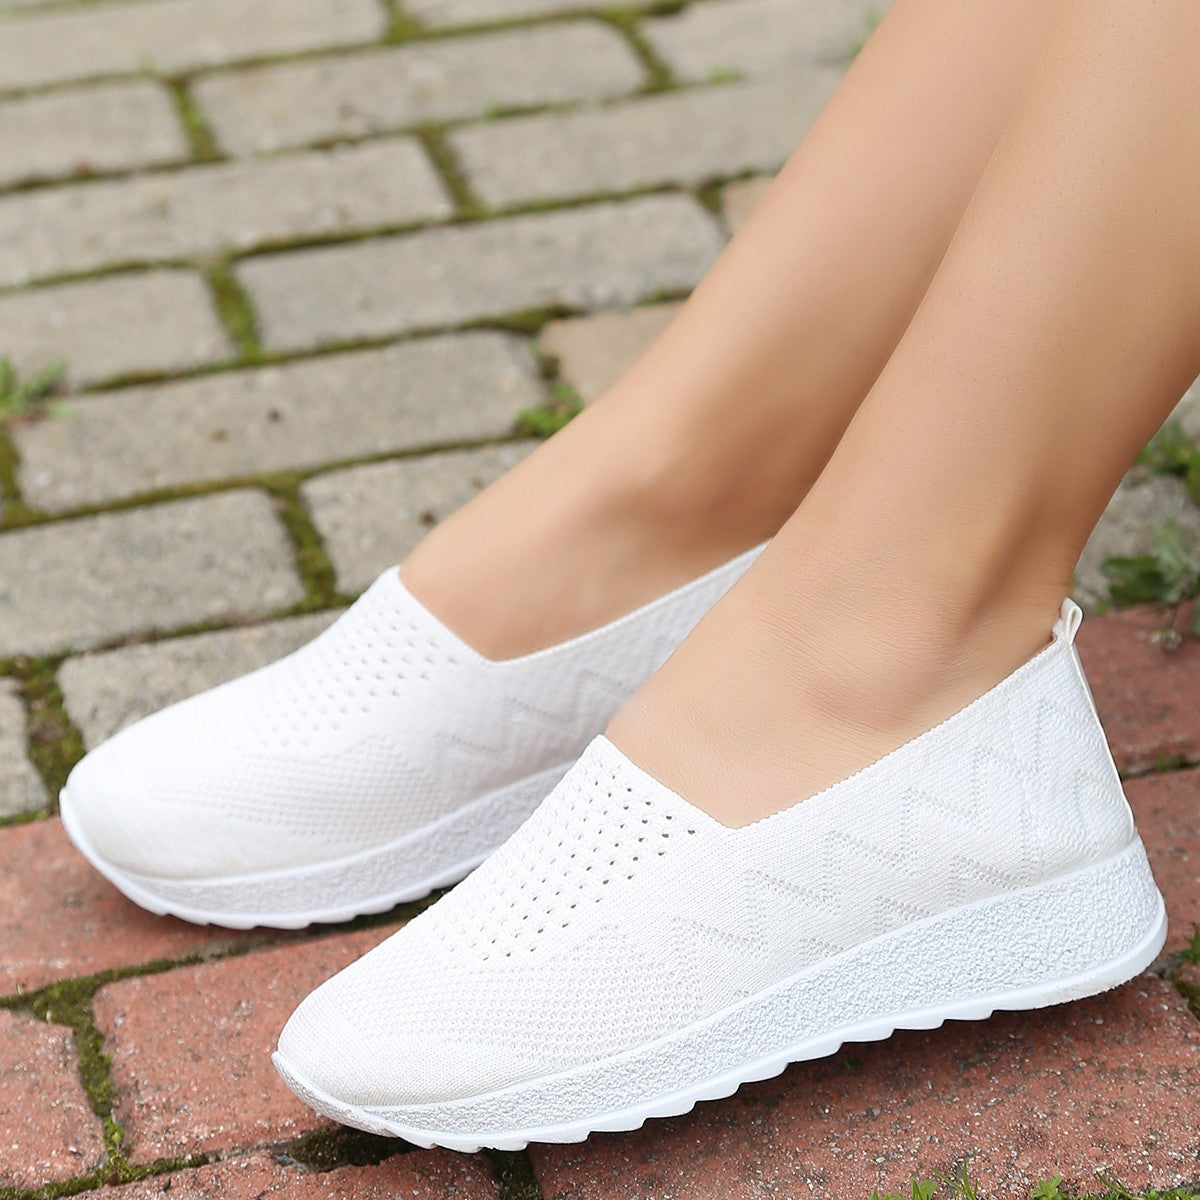 Toly White Knitwear Women's Flat Shoes - STREETMODE ™